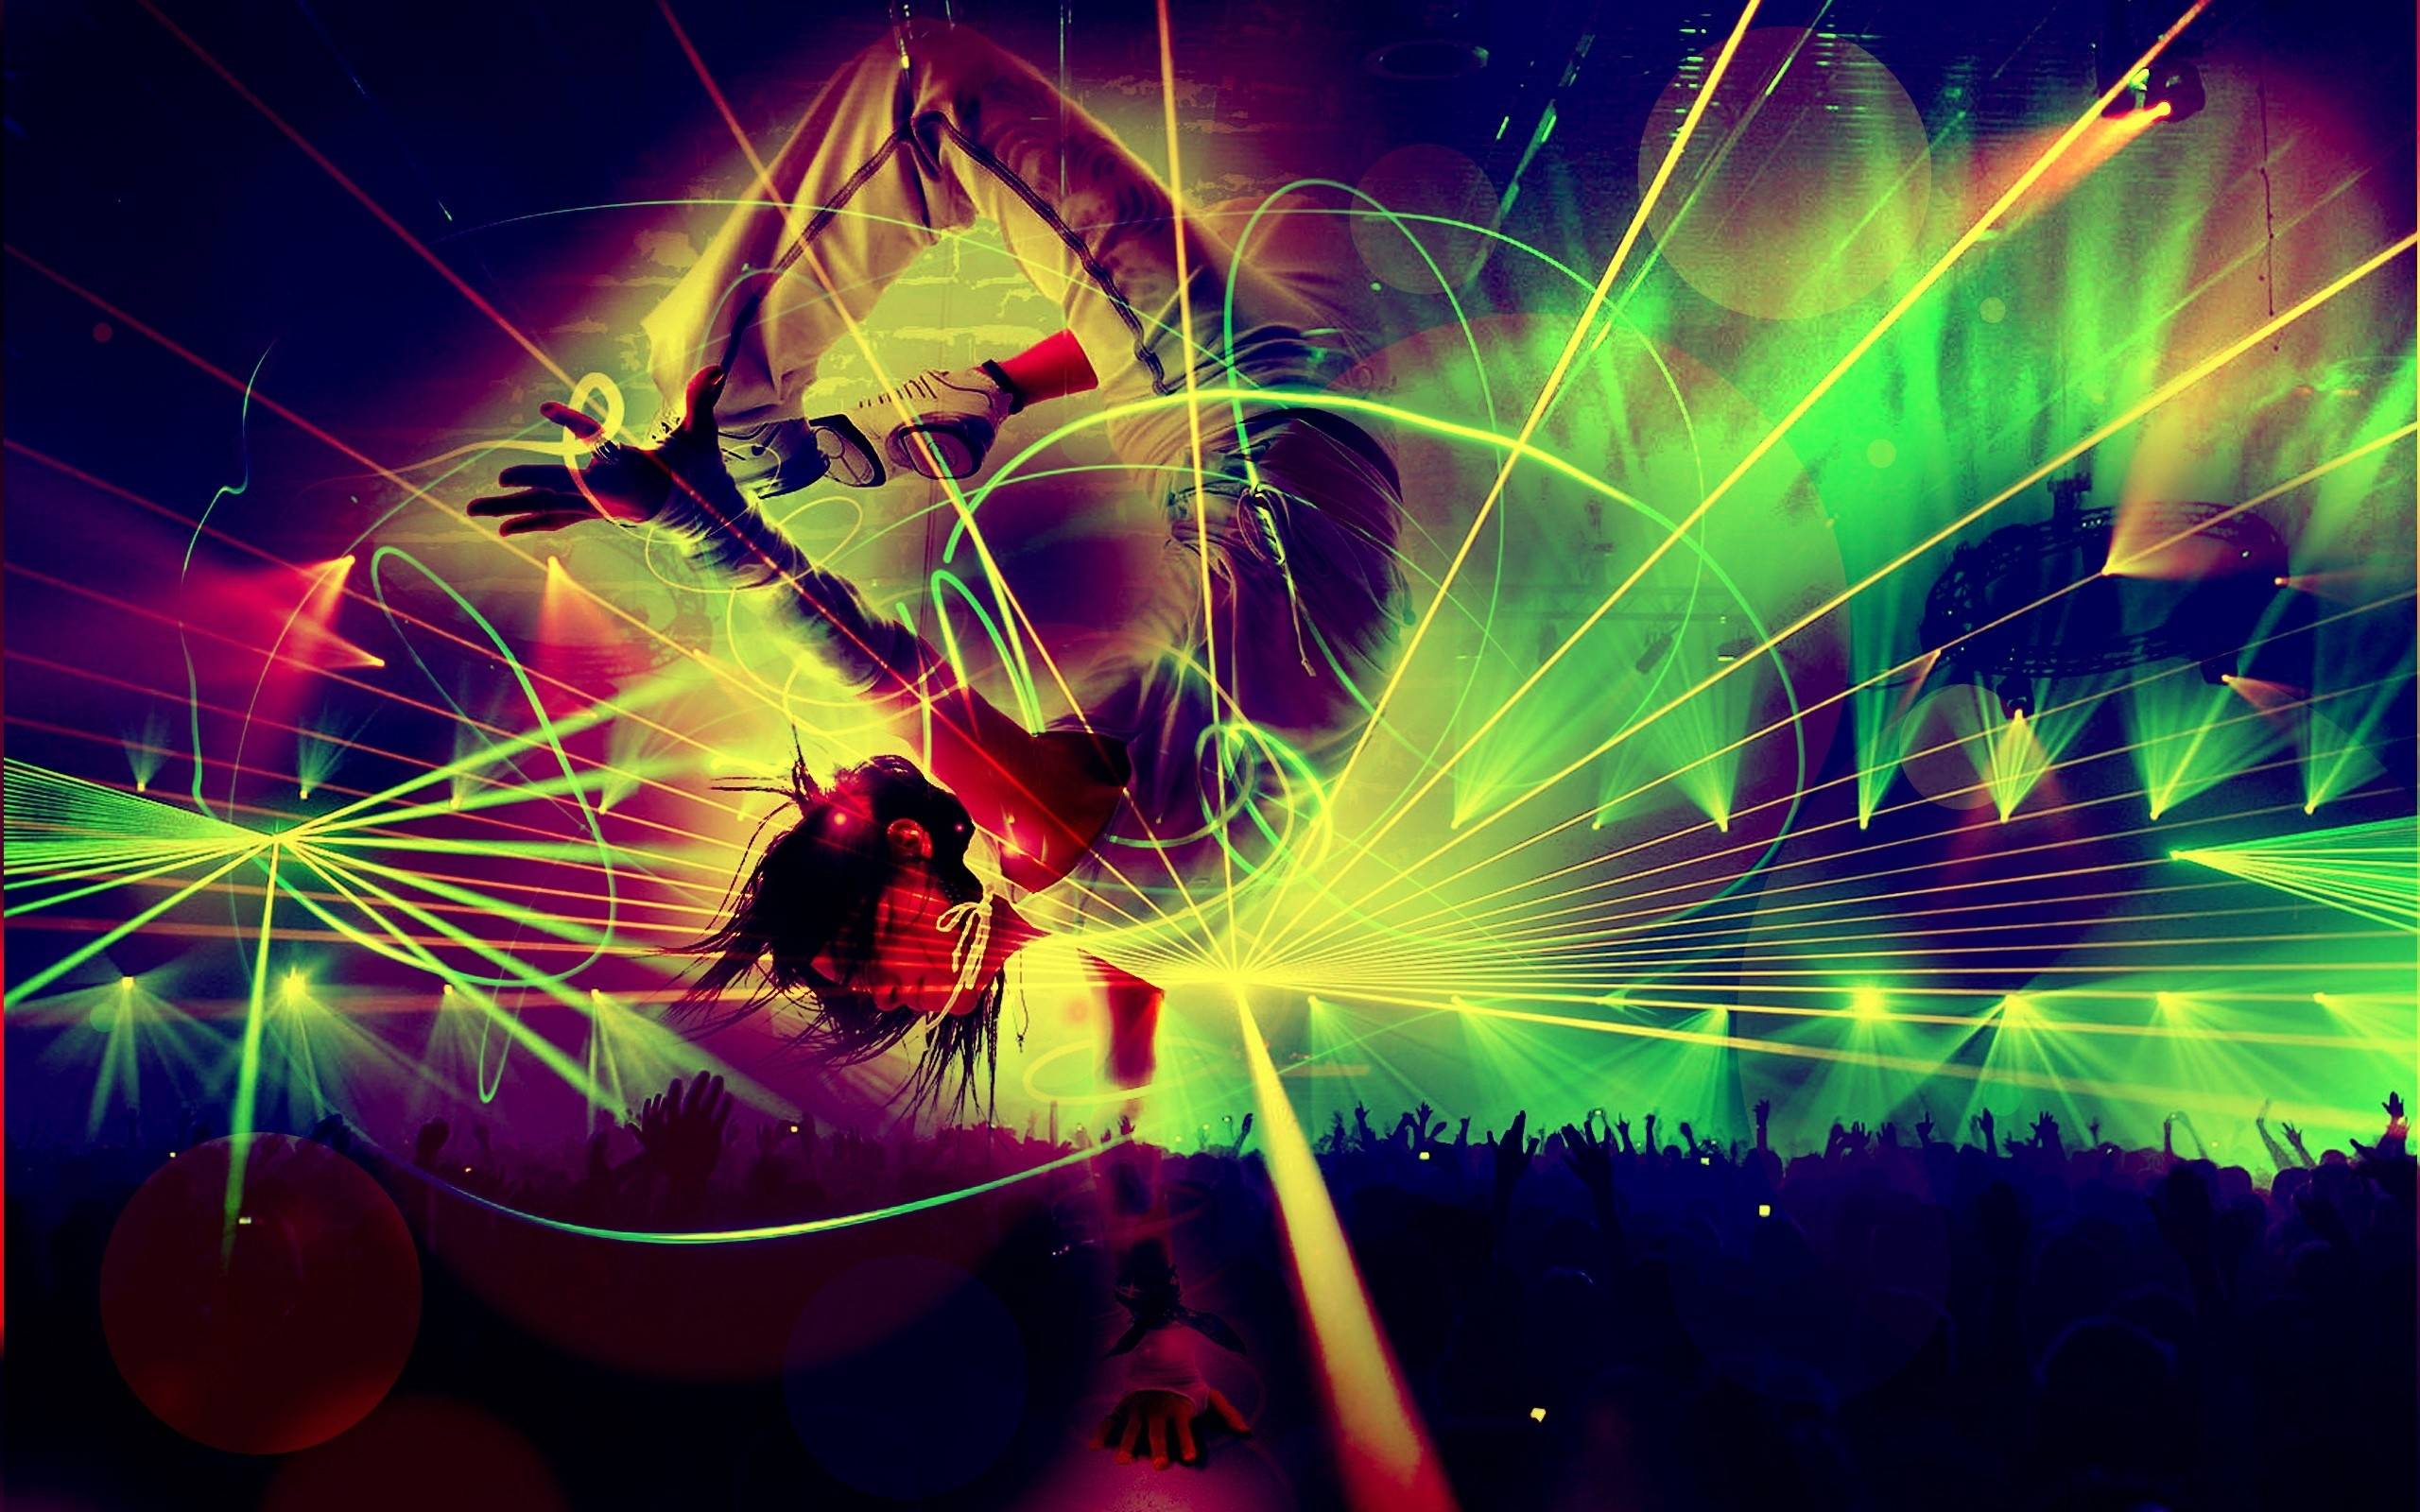 rave wallpaper - Image And Wallpaper free to download